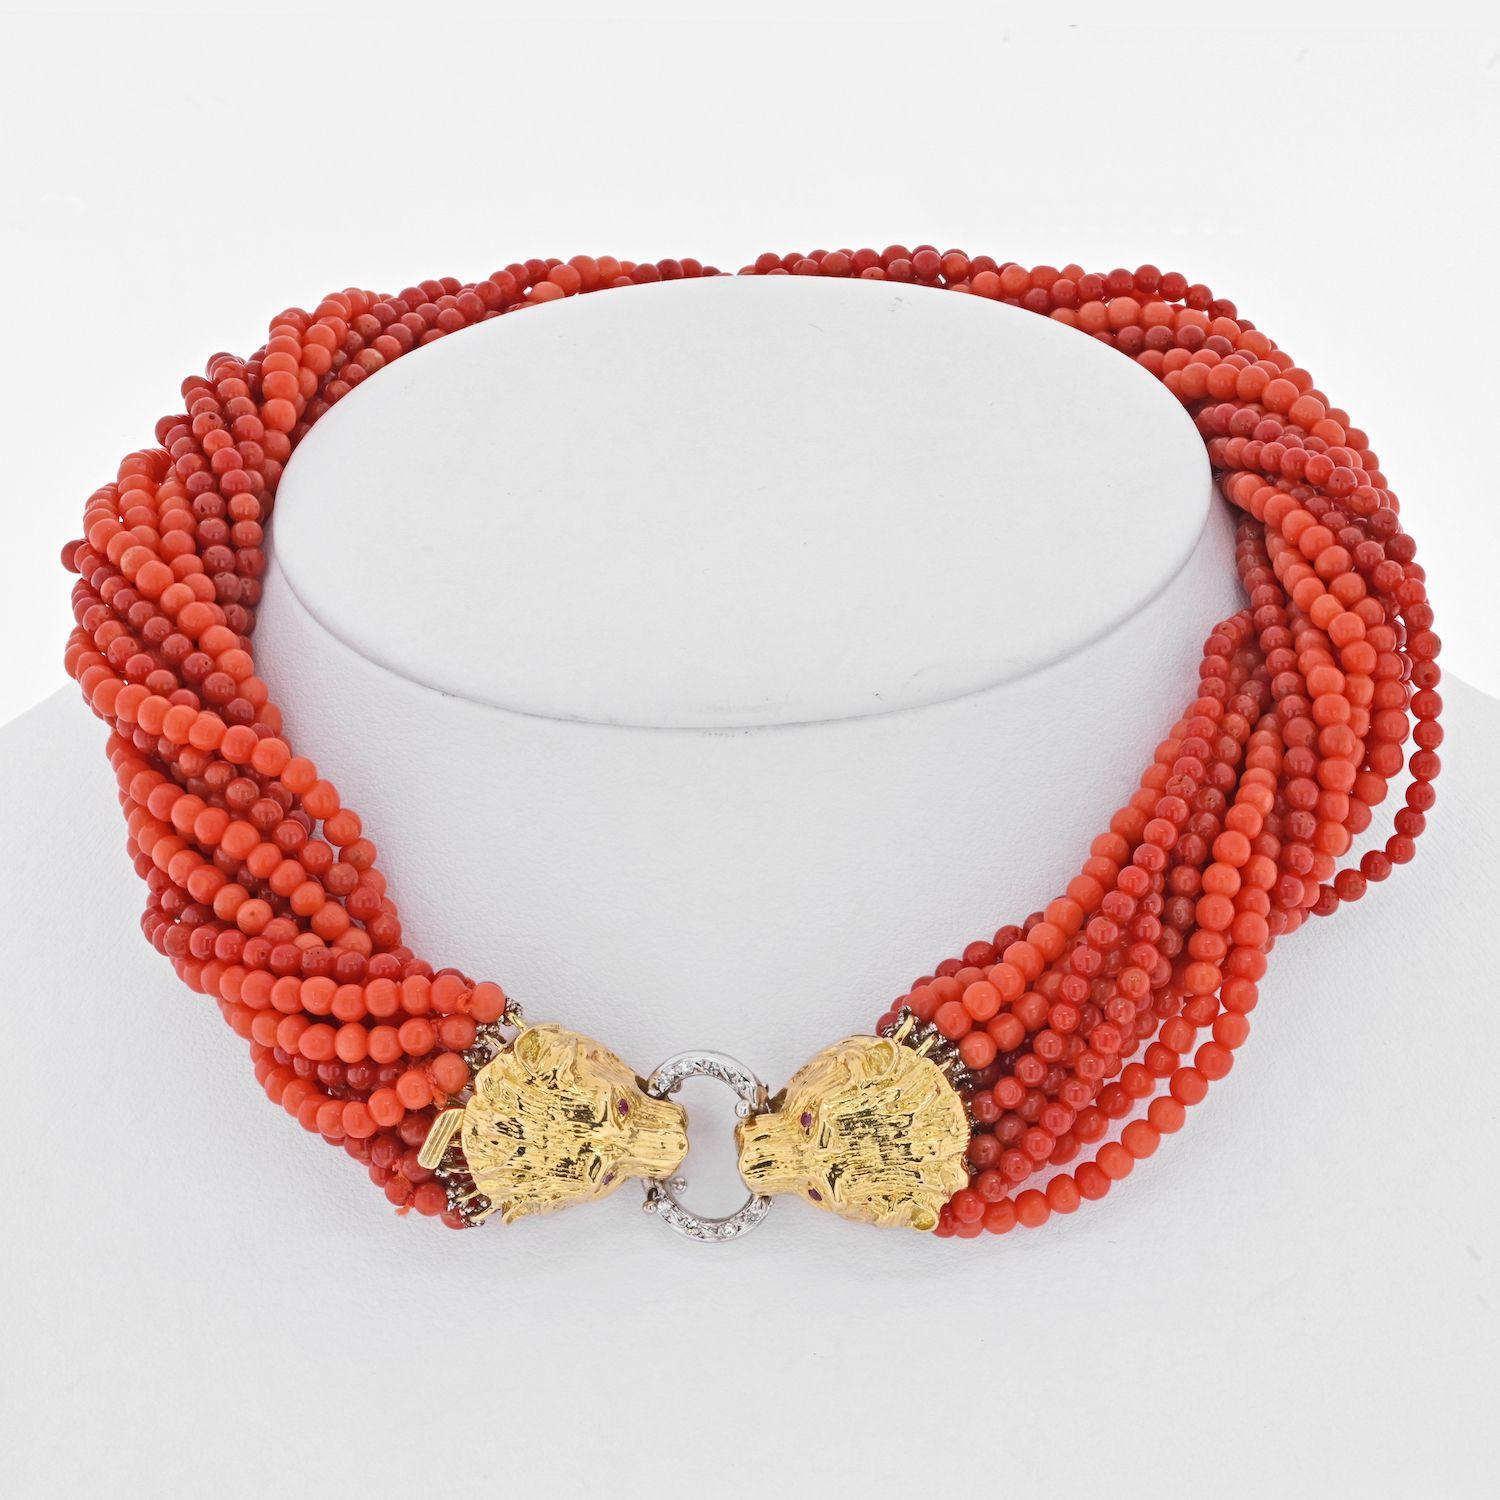 Beautiful multi-strand coral bead trosade necklace made with round bead bright salmon color corald strands finished with 18k gold clasp fashioned as two bear heads latching on a ring. The ring is of white gold and is accented with a few round cut